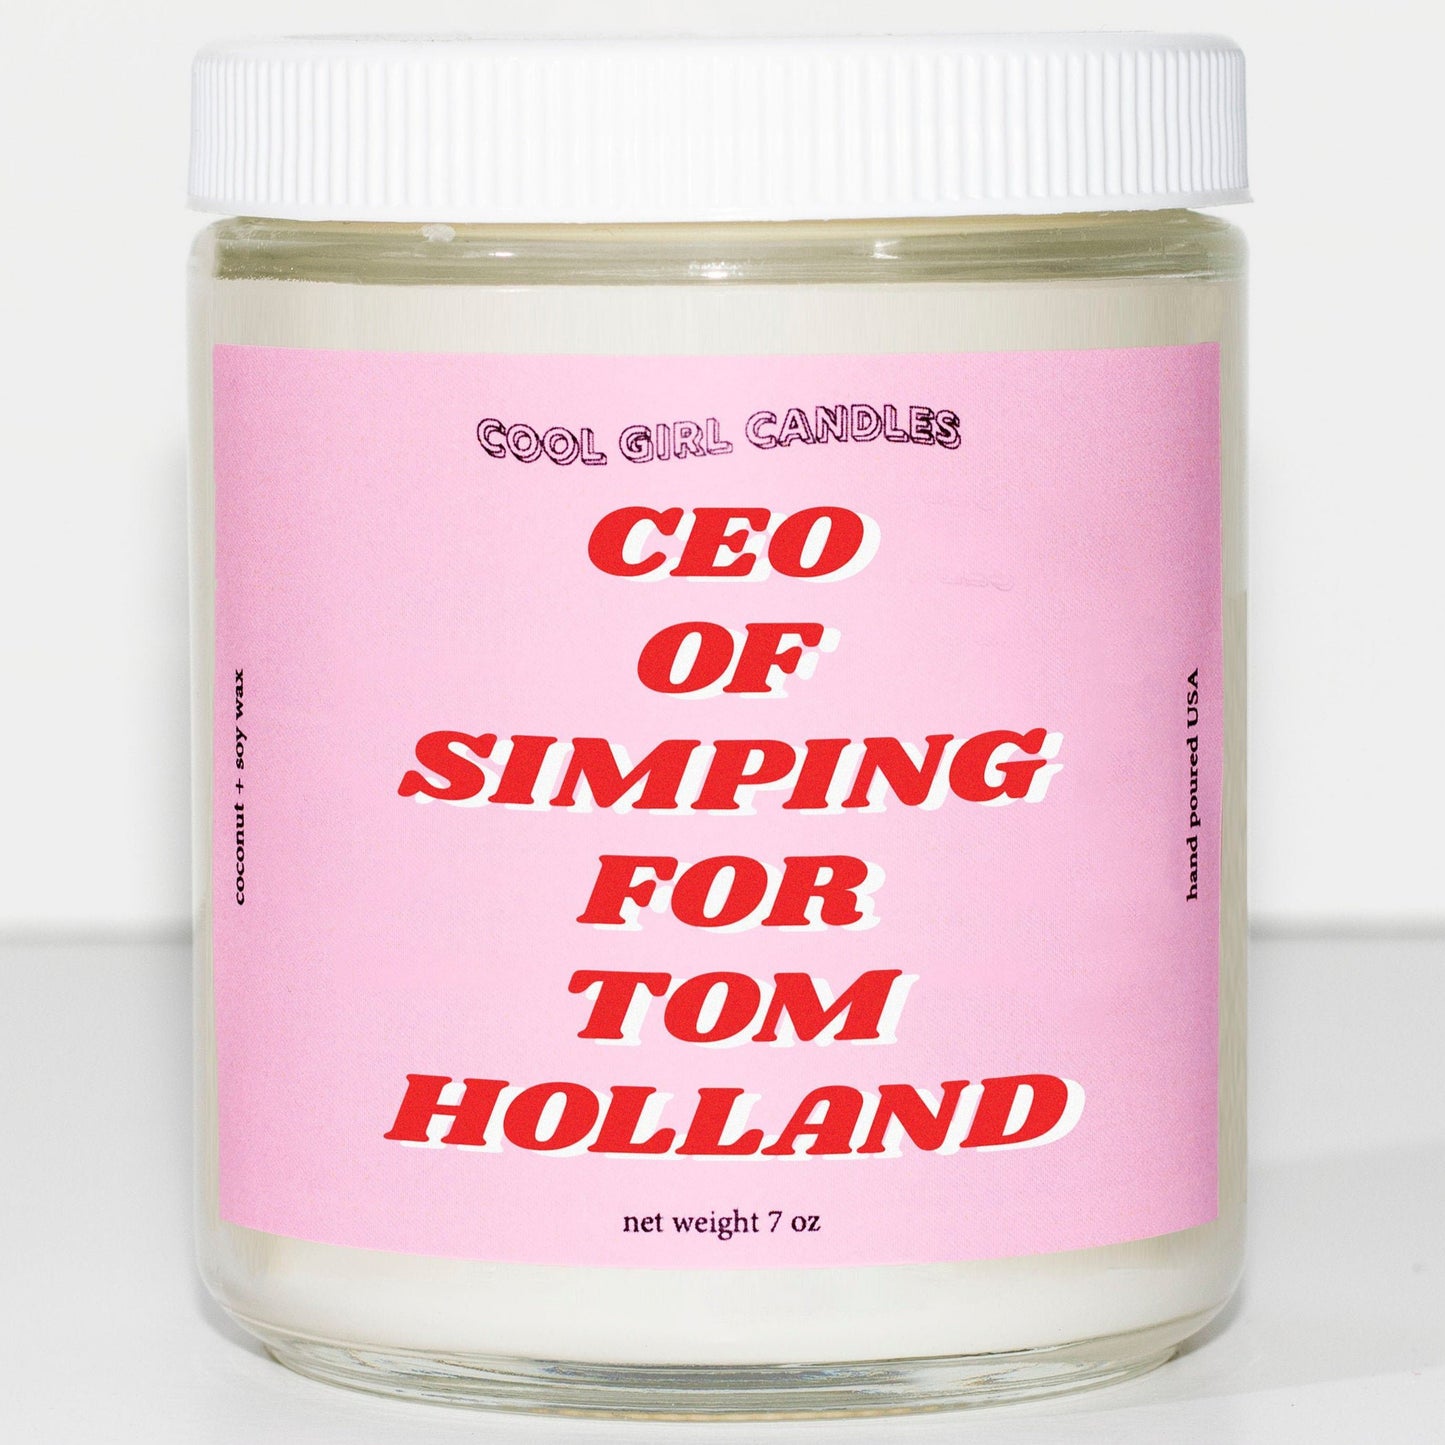 CEO of Simping For Tom Holland Candle